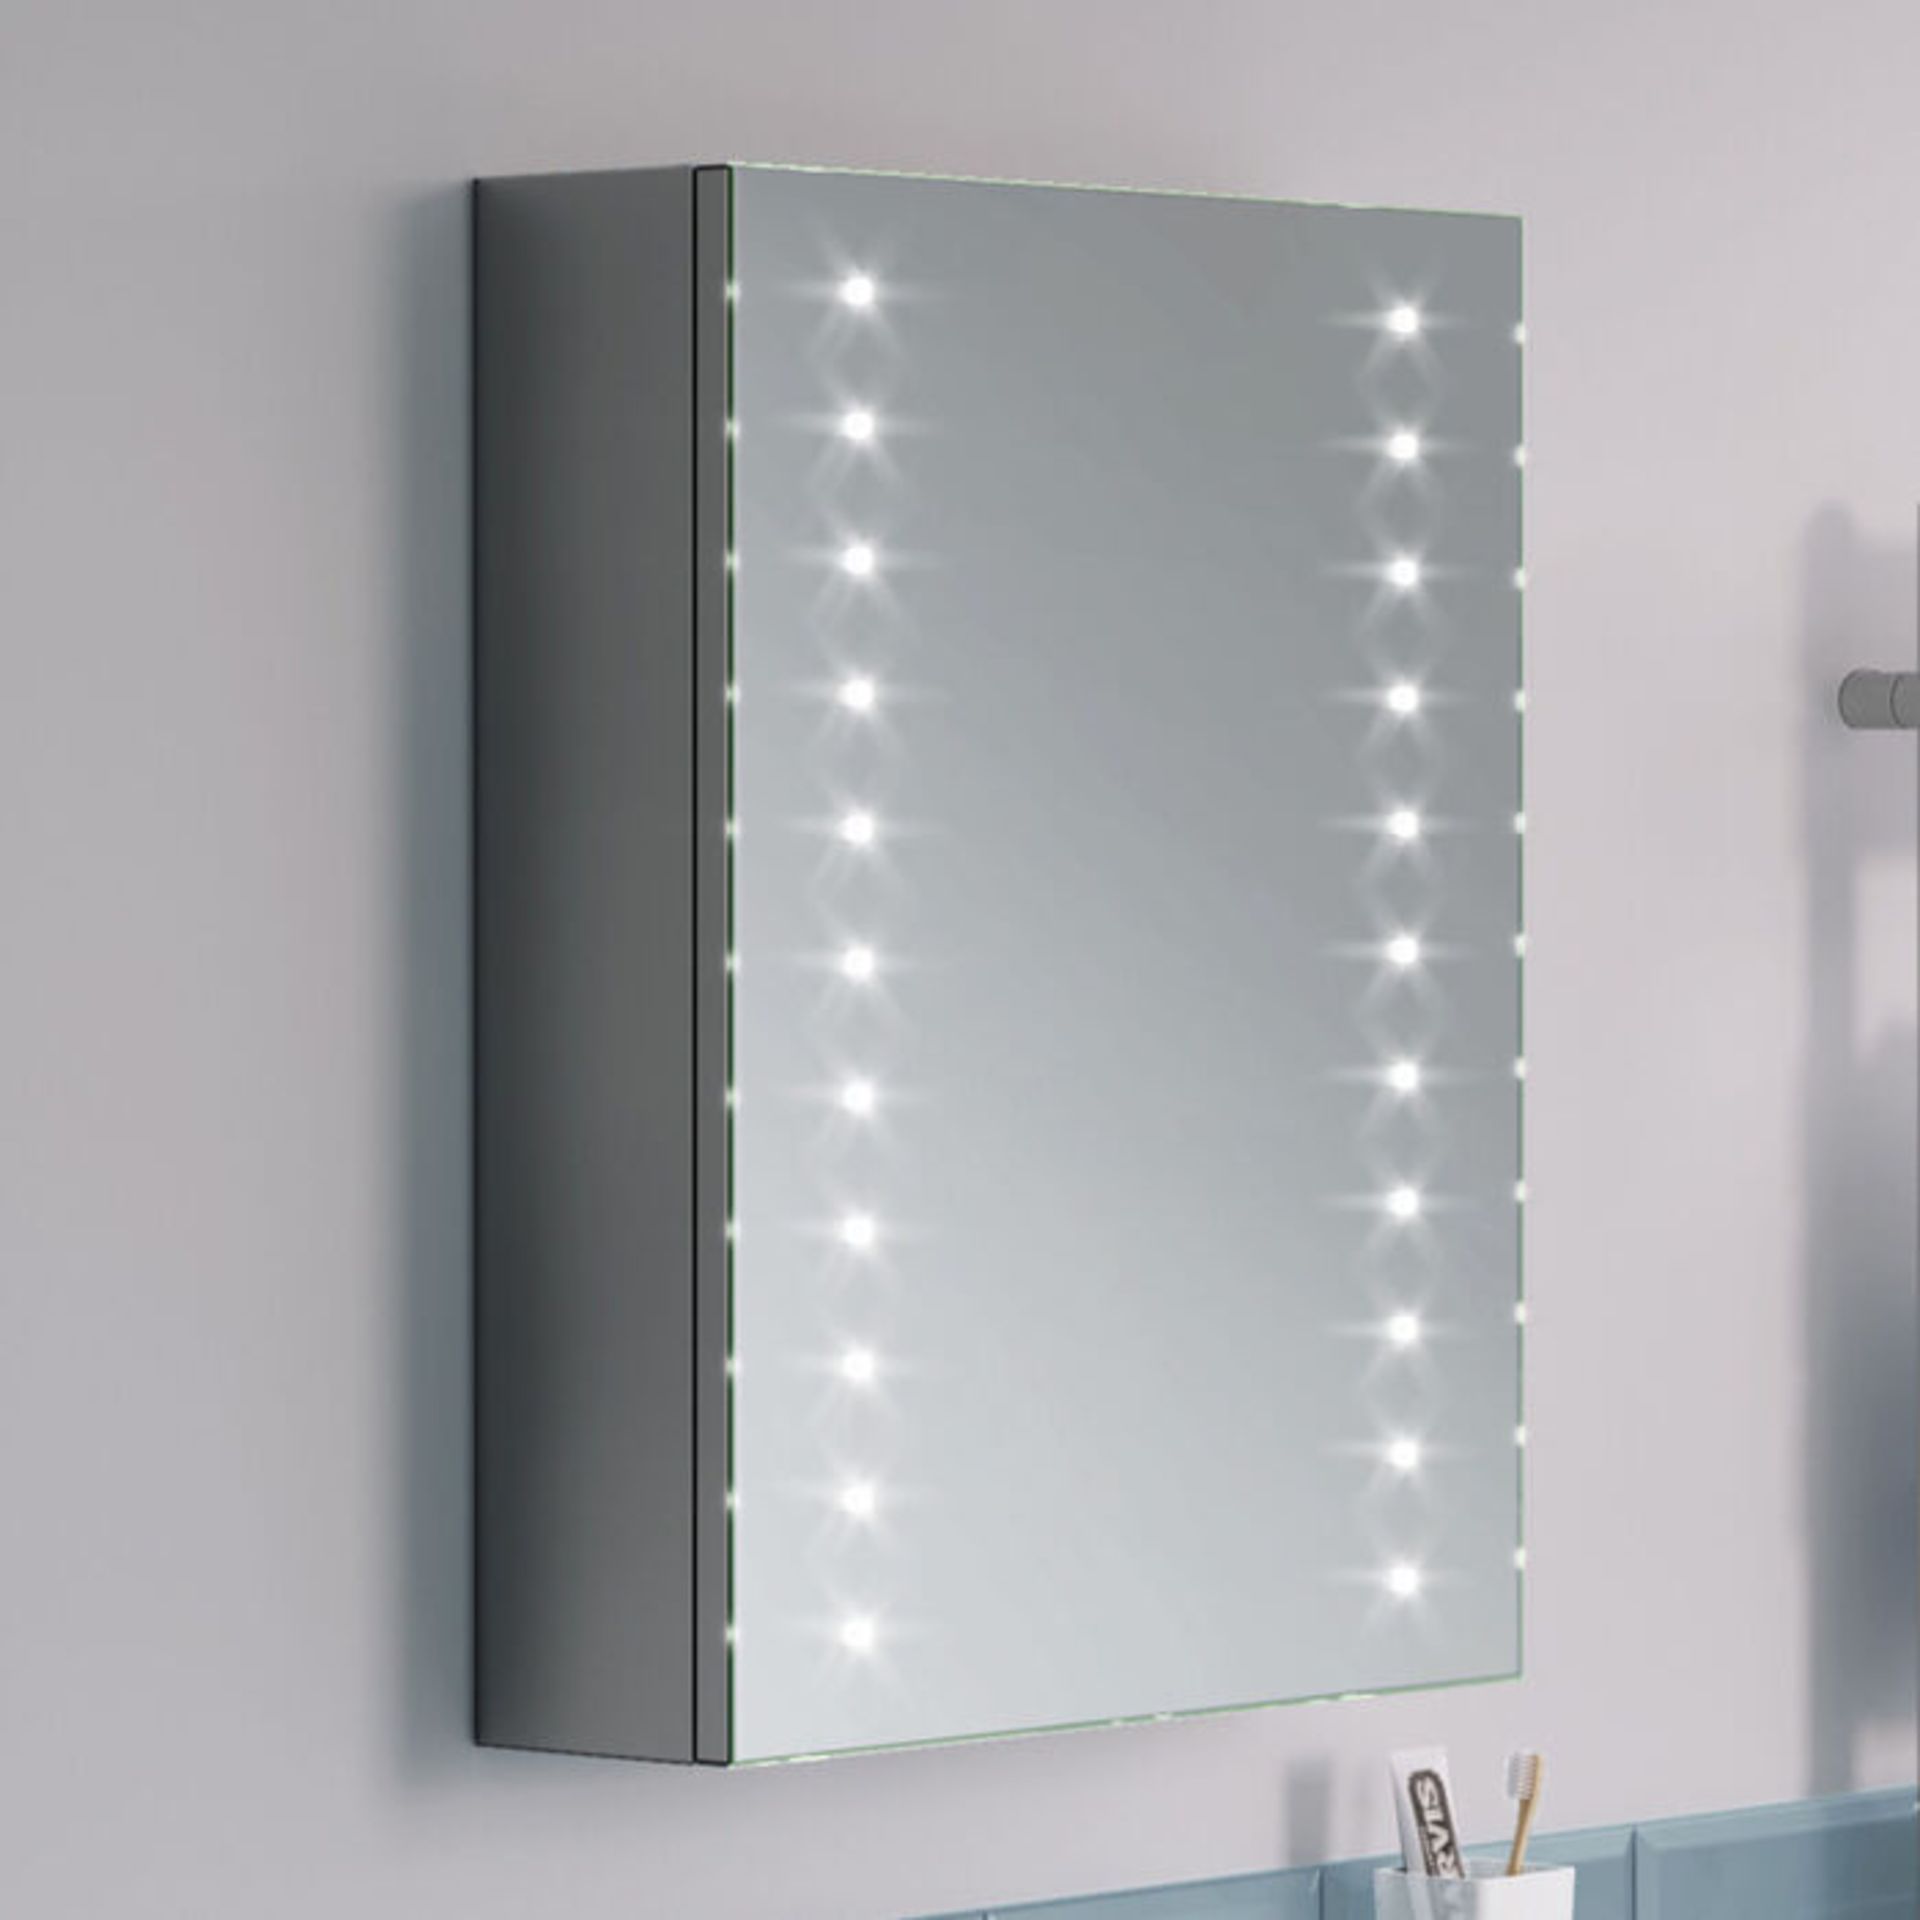 (Z3) 450x600mm Galactic Illuminated LED Mirror Cabinet - Shaver Socket. RRP £499.99. We love t... - Image 3 of 4